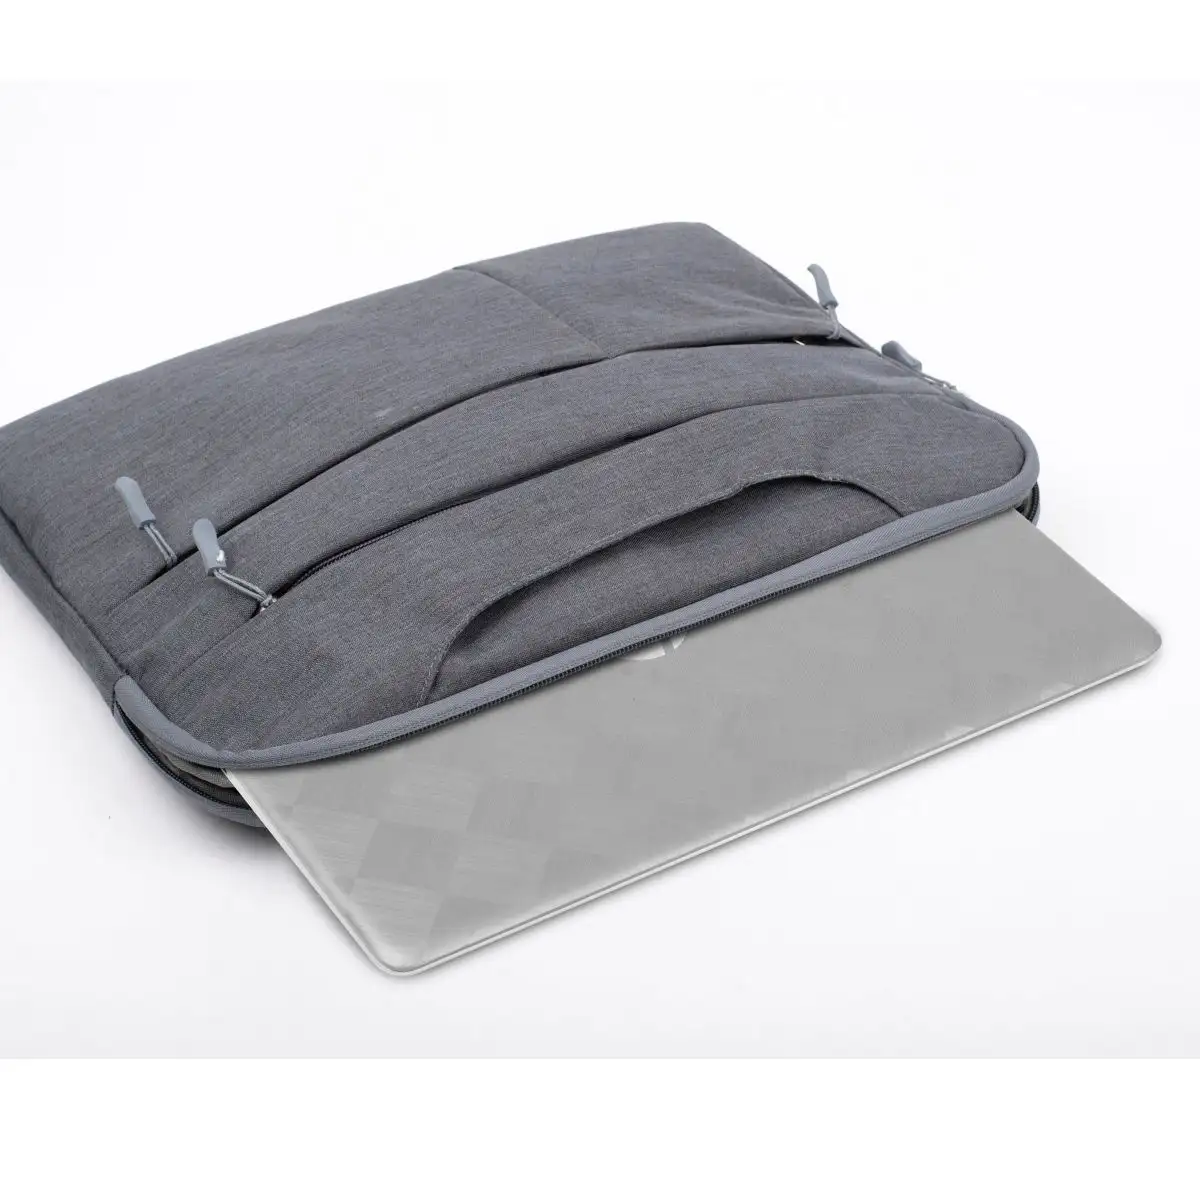 Castilo Milano S 29 Laptop Sleeve, 6 Spacious Outer Pockets, Soft Touch Fabric, Holds a Full 15″ Laptop